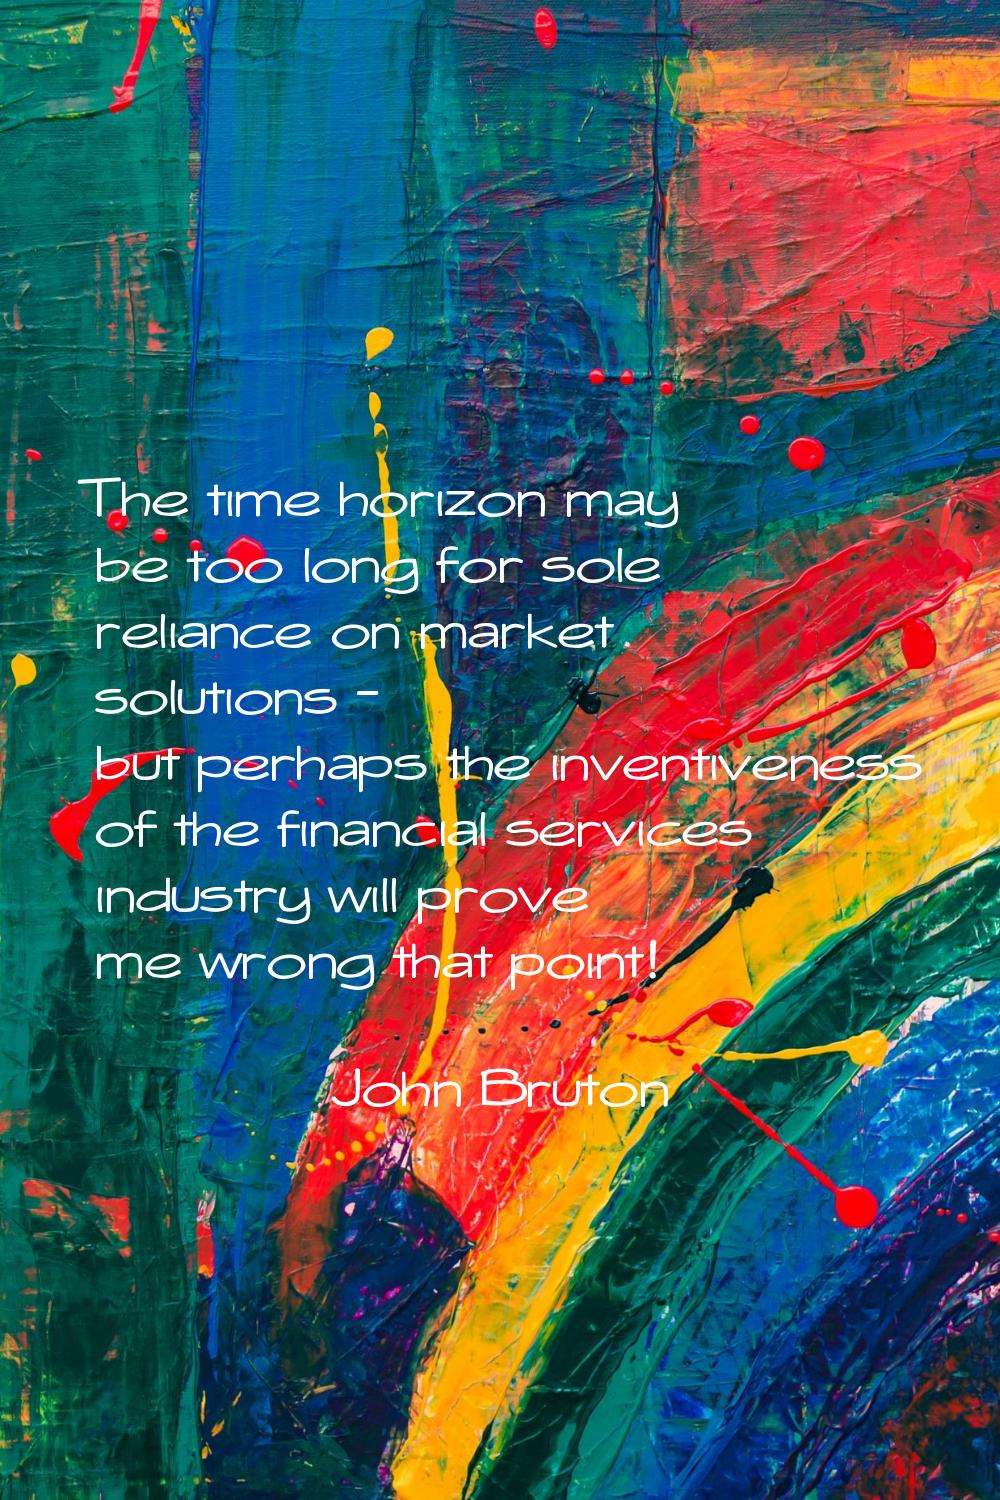 The time horizon may be too long for sole reliance on market solutions - but perhaps the inventiven